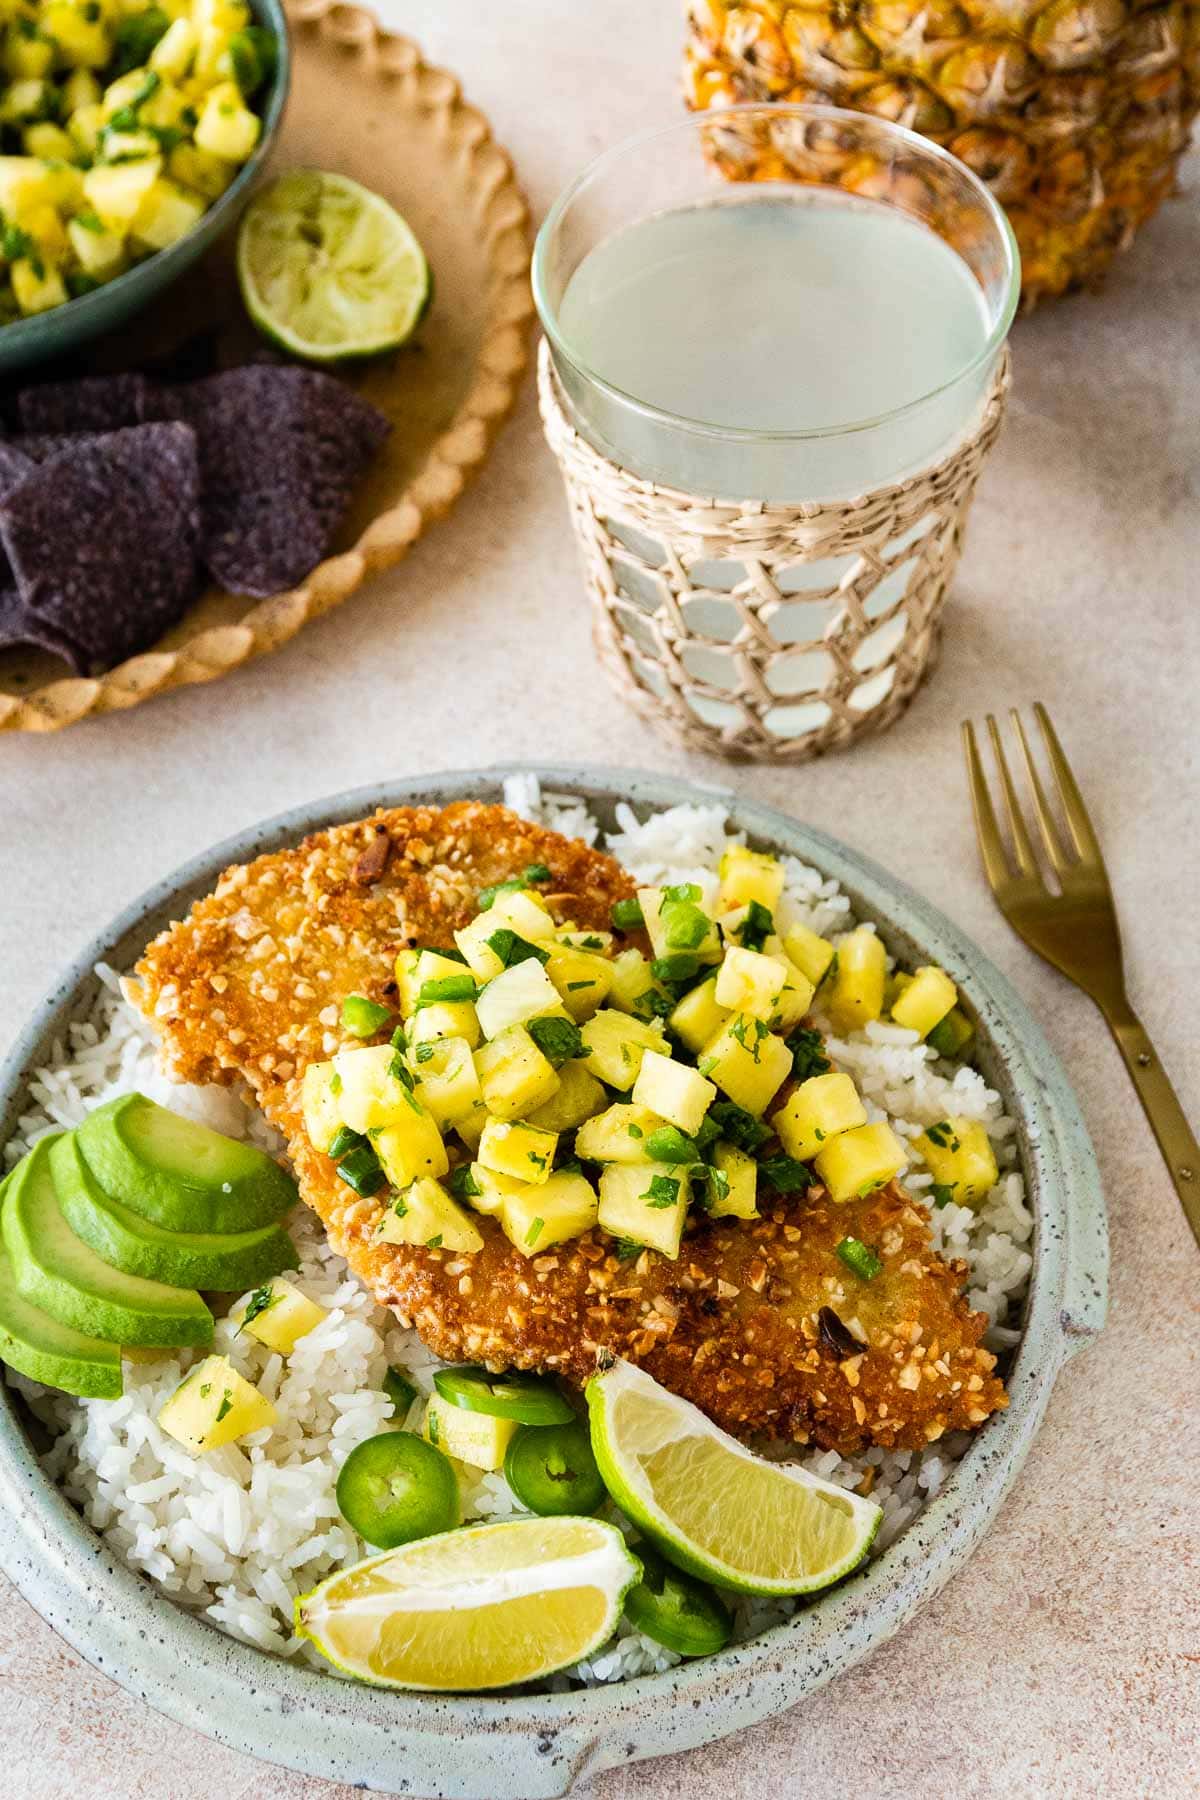 Macadamia Crusted Chicken with Pineapple Jalapeno Salsa in bowl with rice and avocado